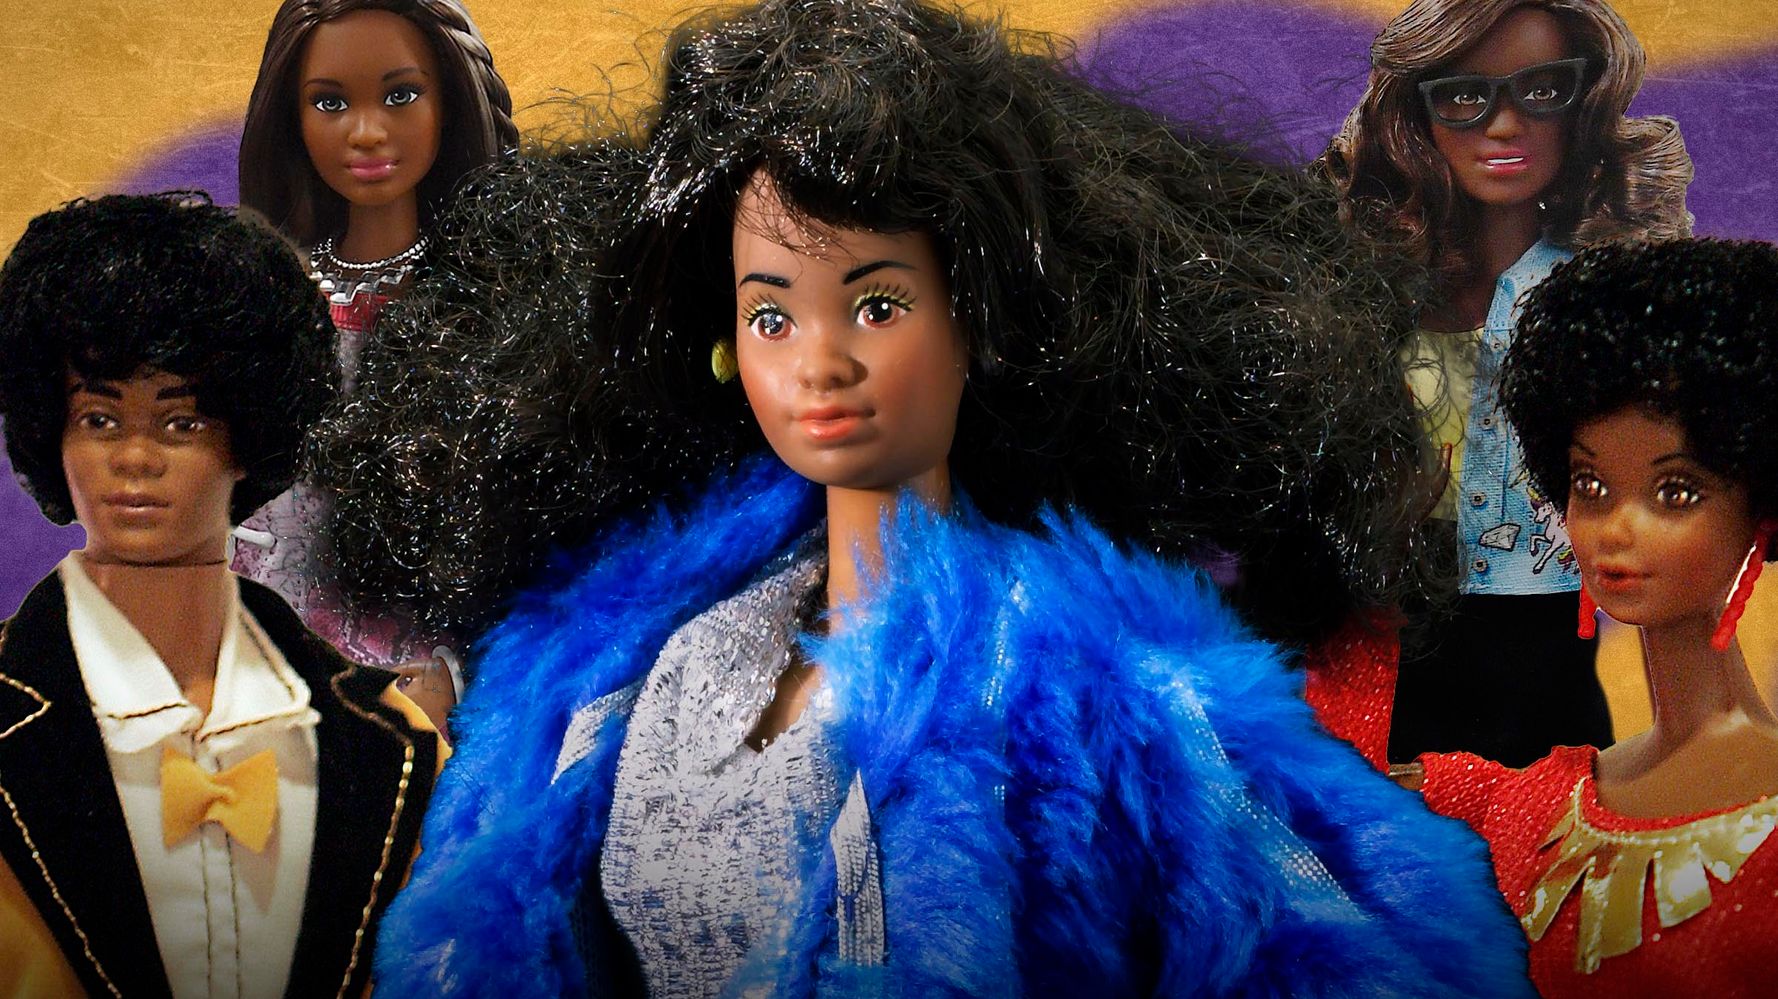 A parent's guide to 'Barbie': What to know before watching it with